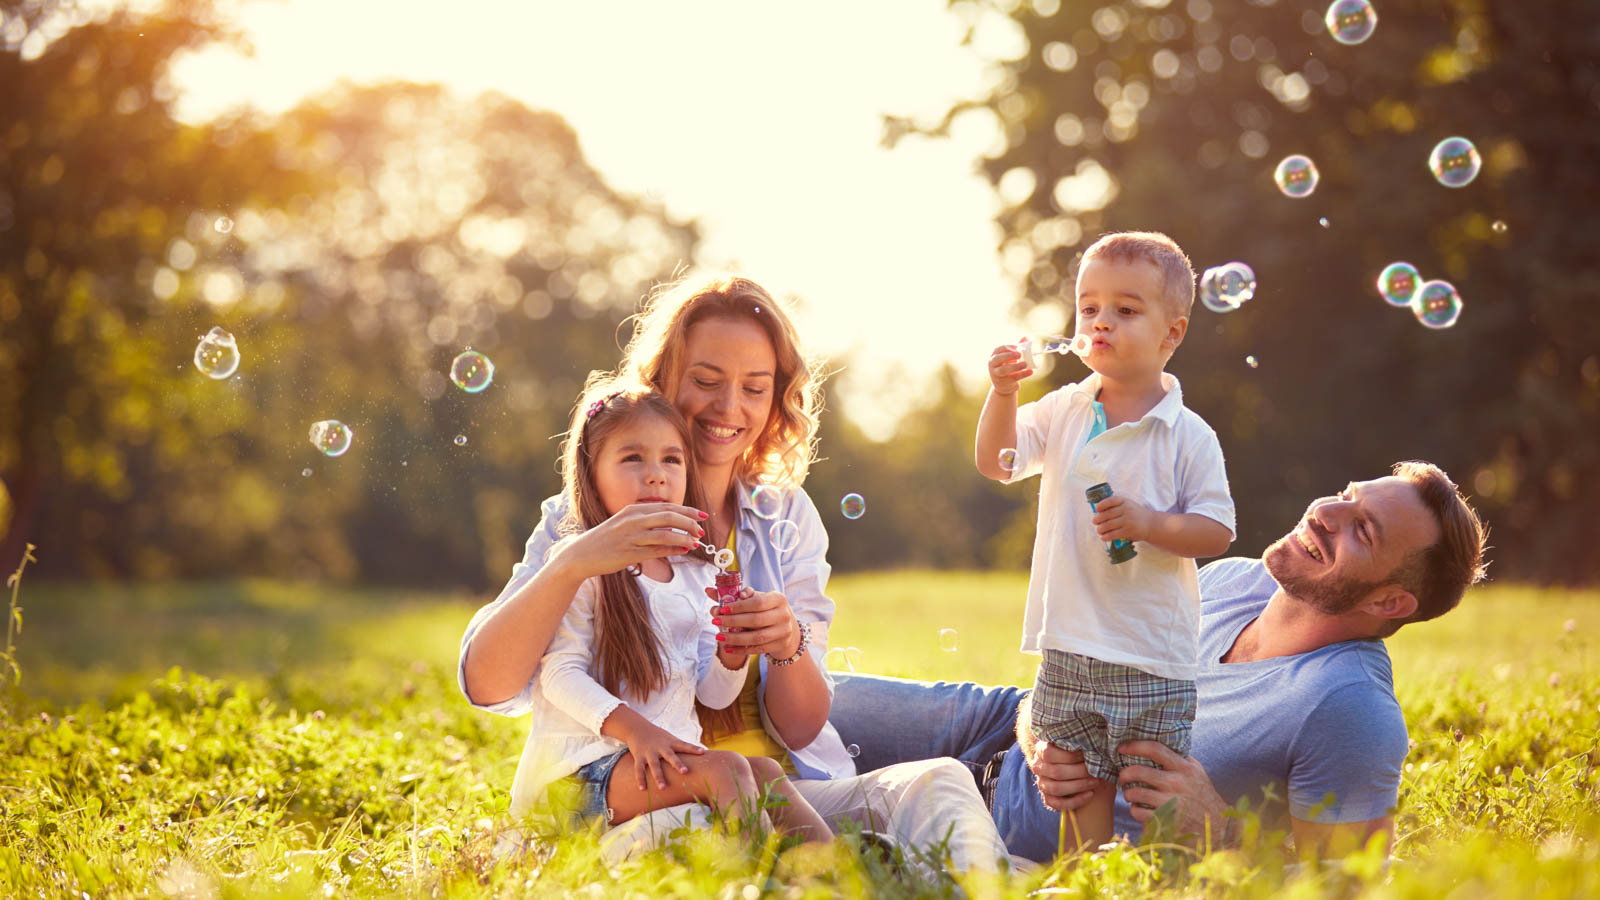 parents blowing bubbles with their kids on a sunny day